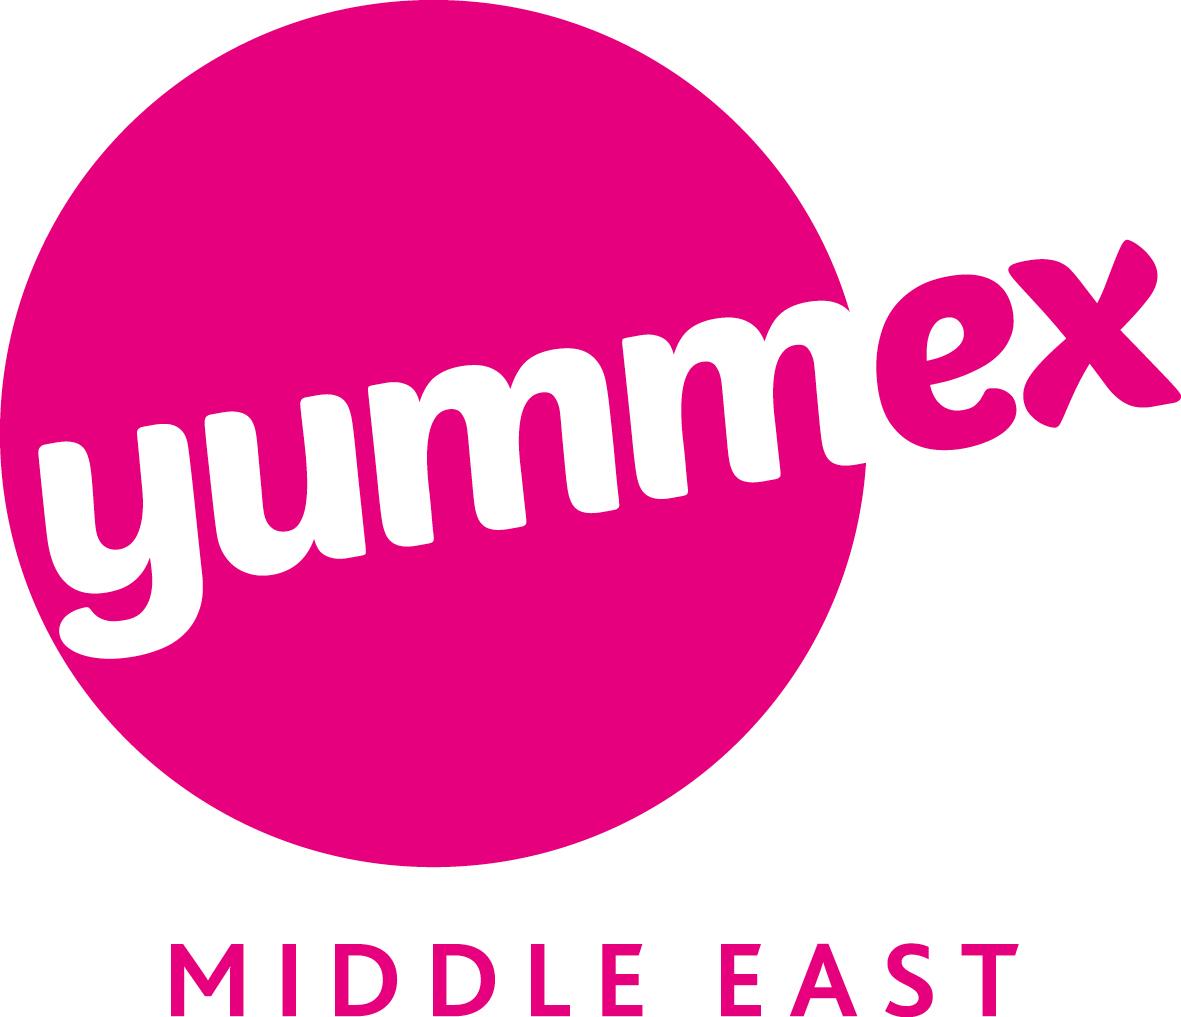 yummex Middle East Events from United Arab Emirates